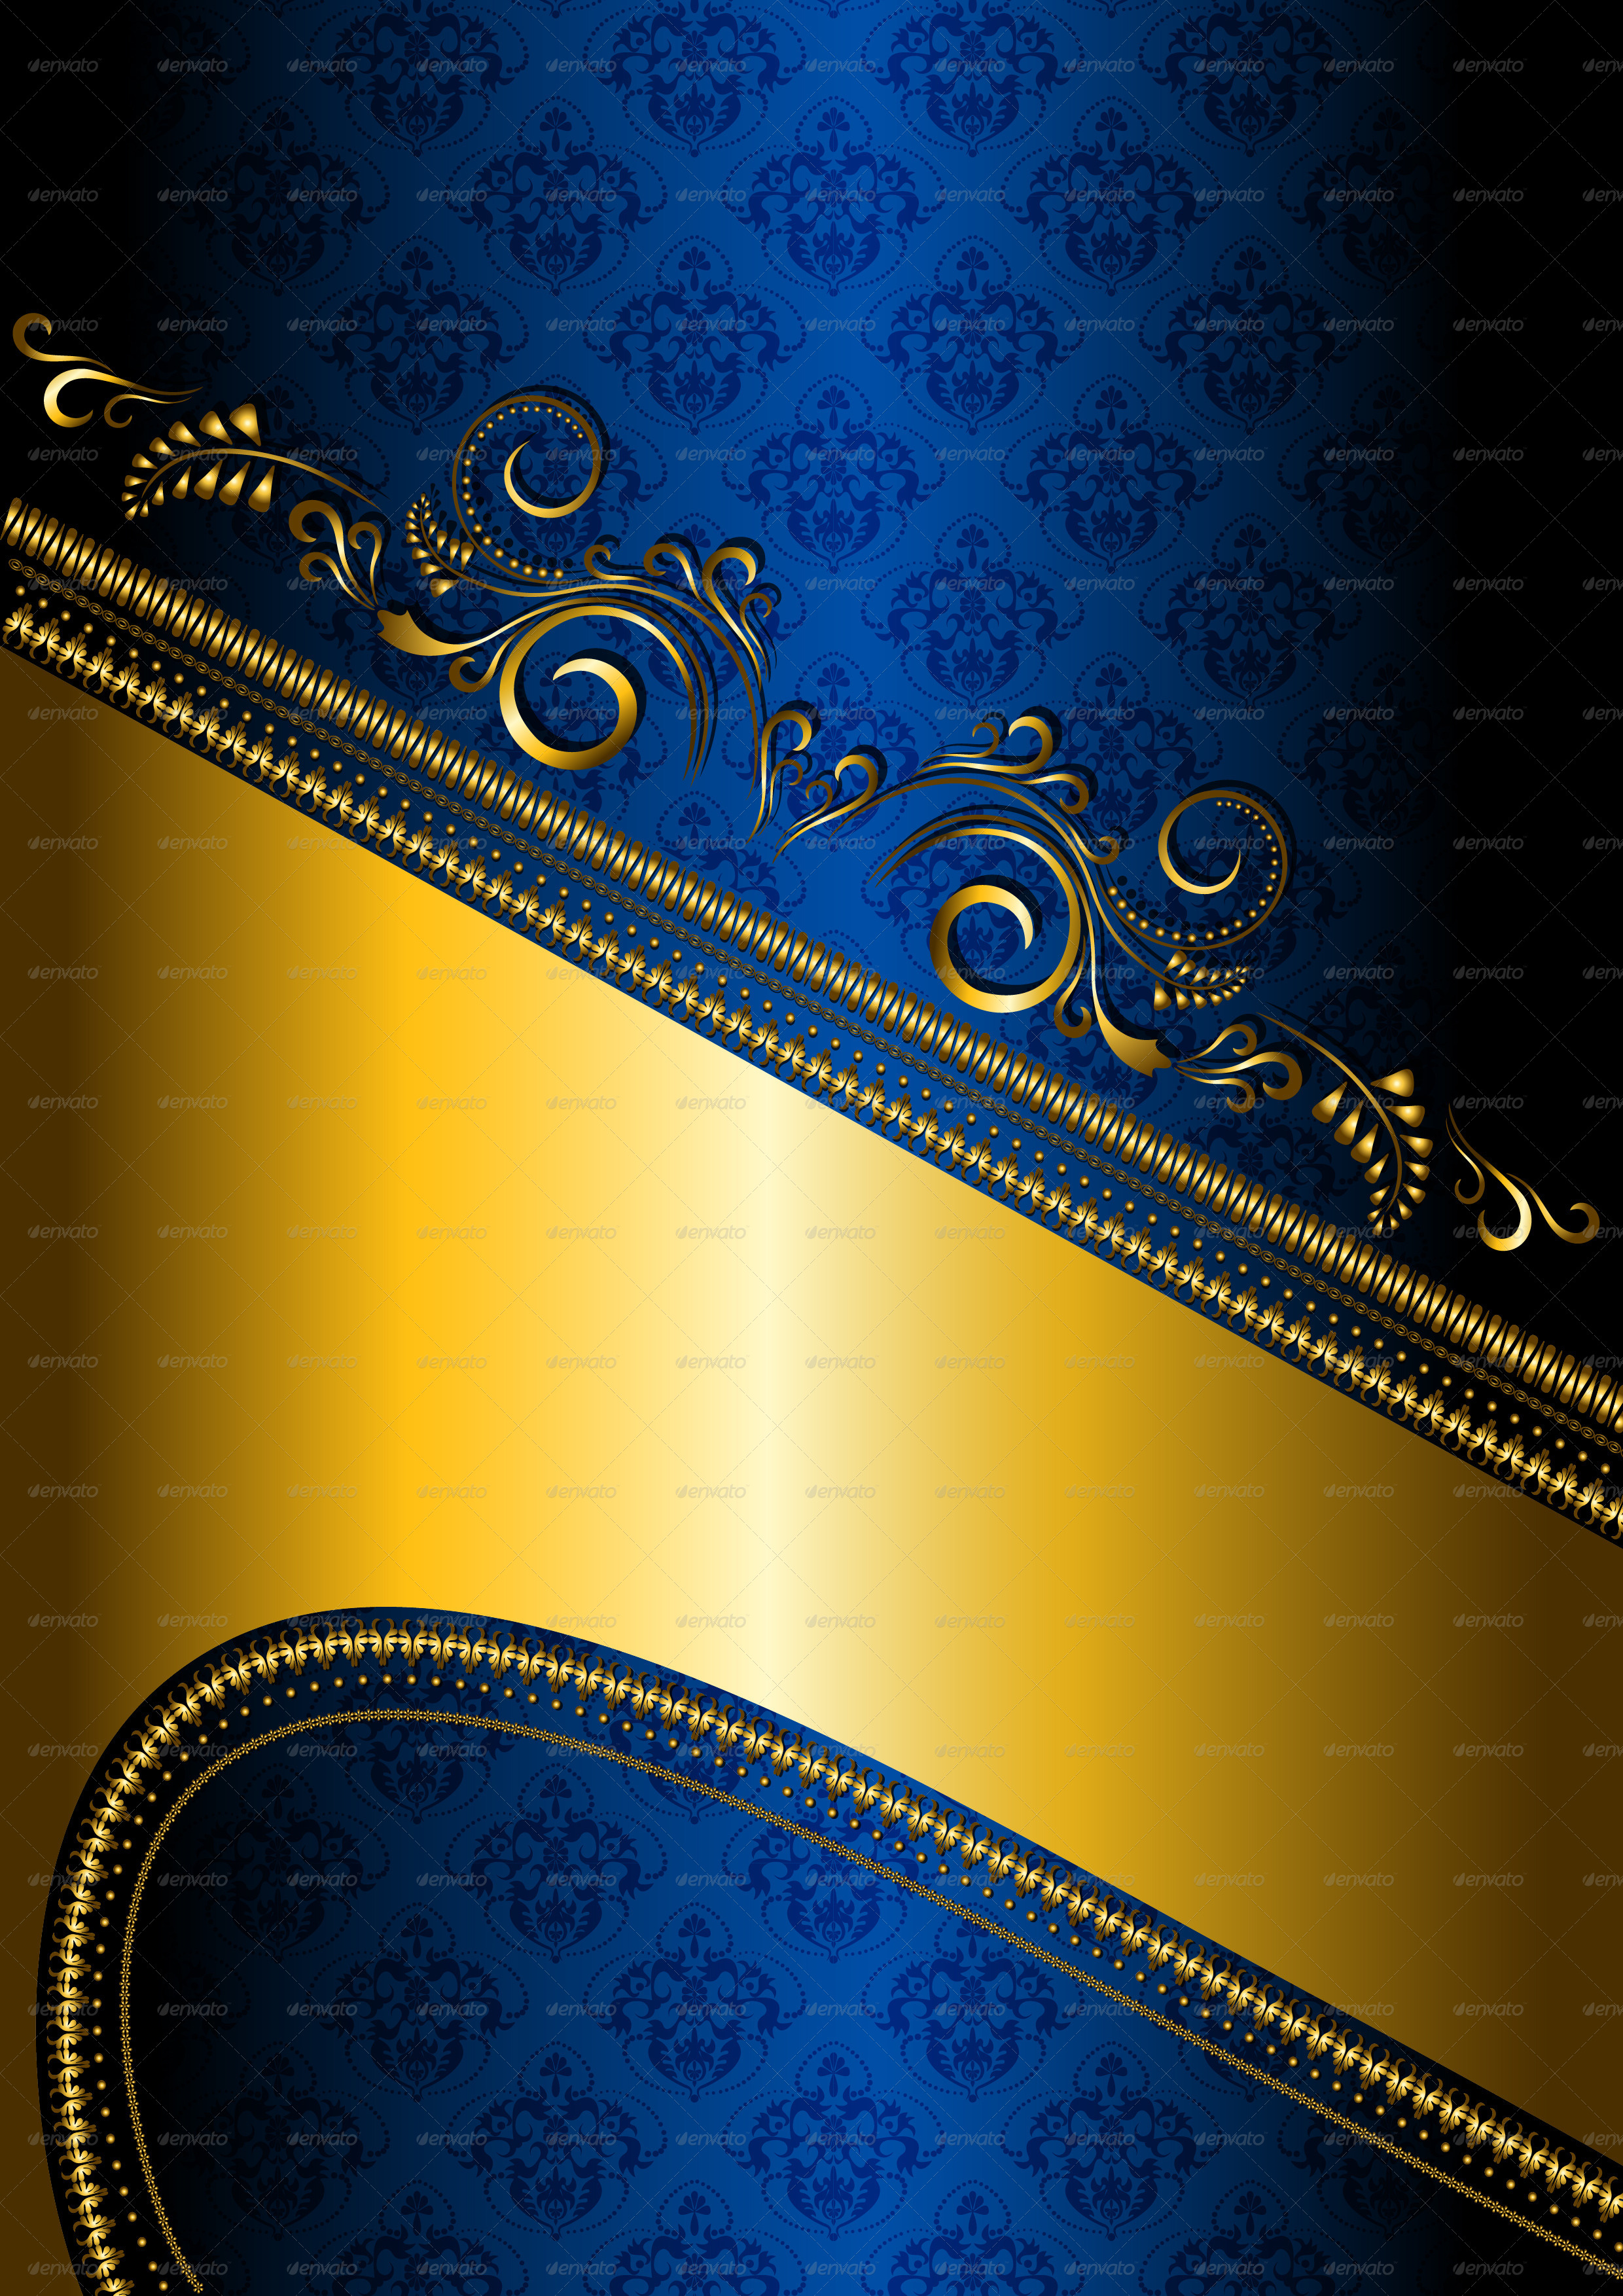 Gold Border on Blue Patterned Background   GraphicRiver Previewer